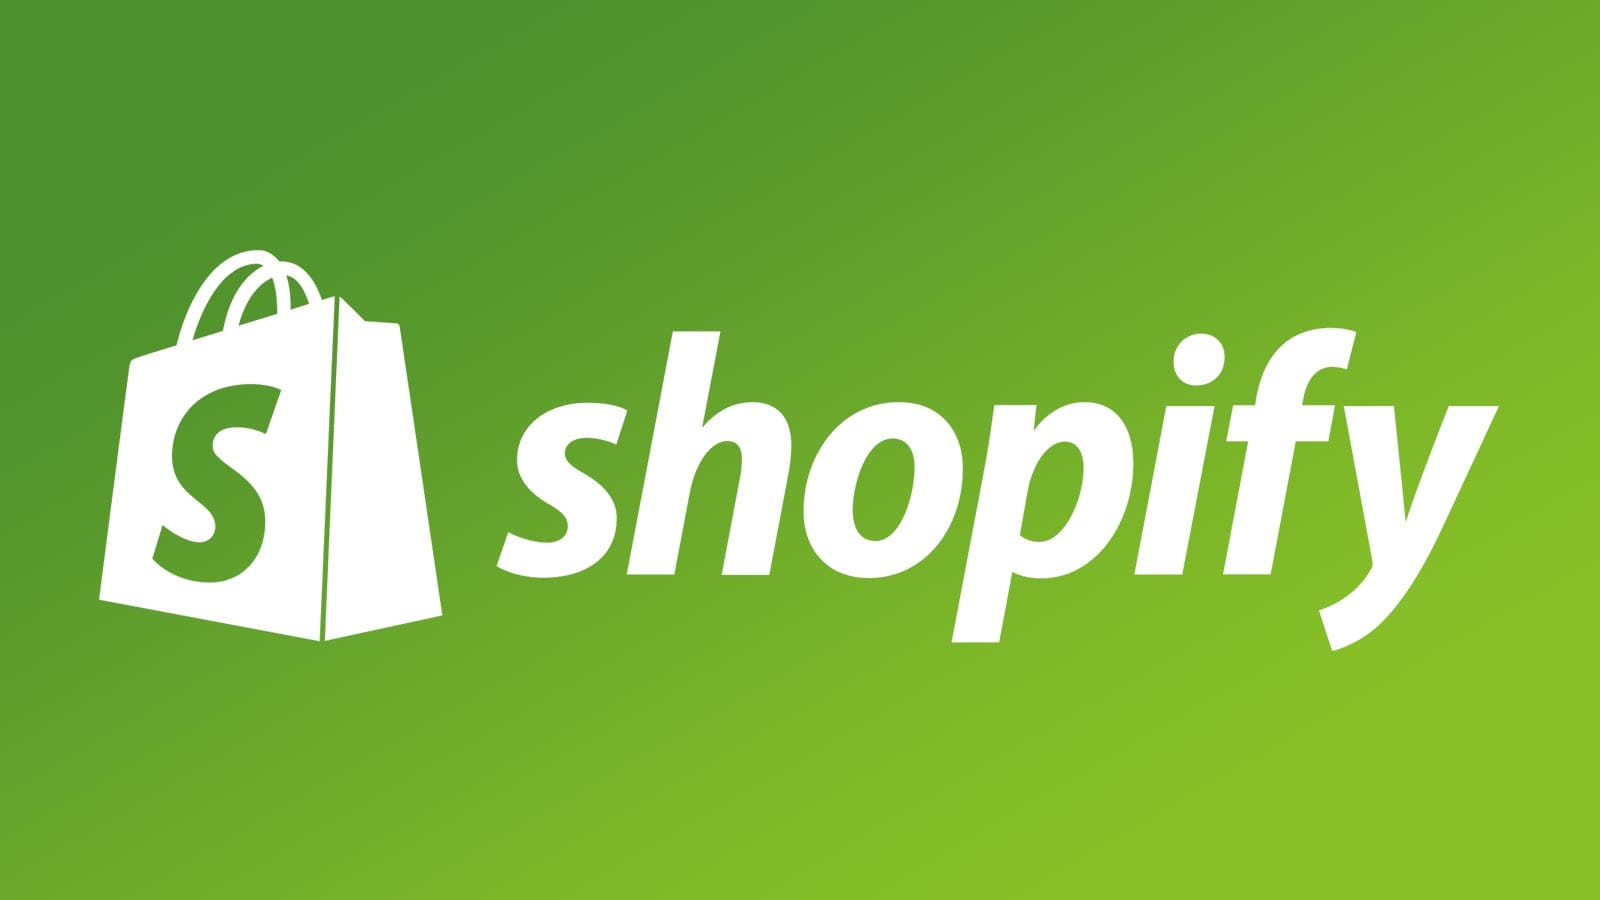 Building An Ecommerce Store With Shopify: All You Need To Know | Milia Marketing